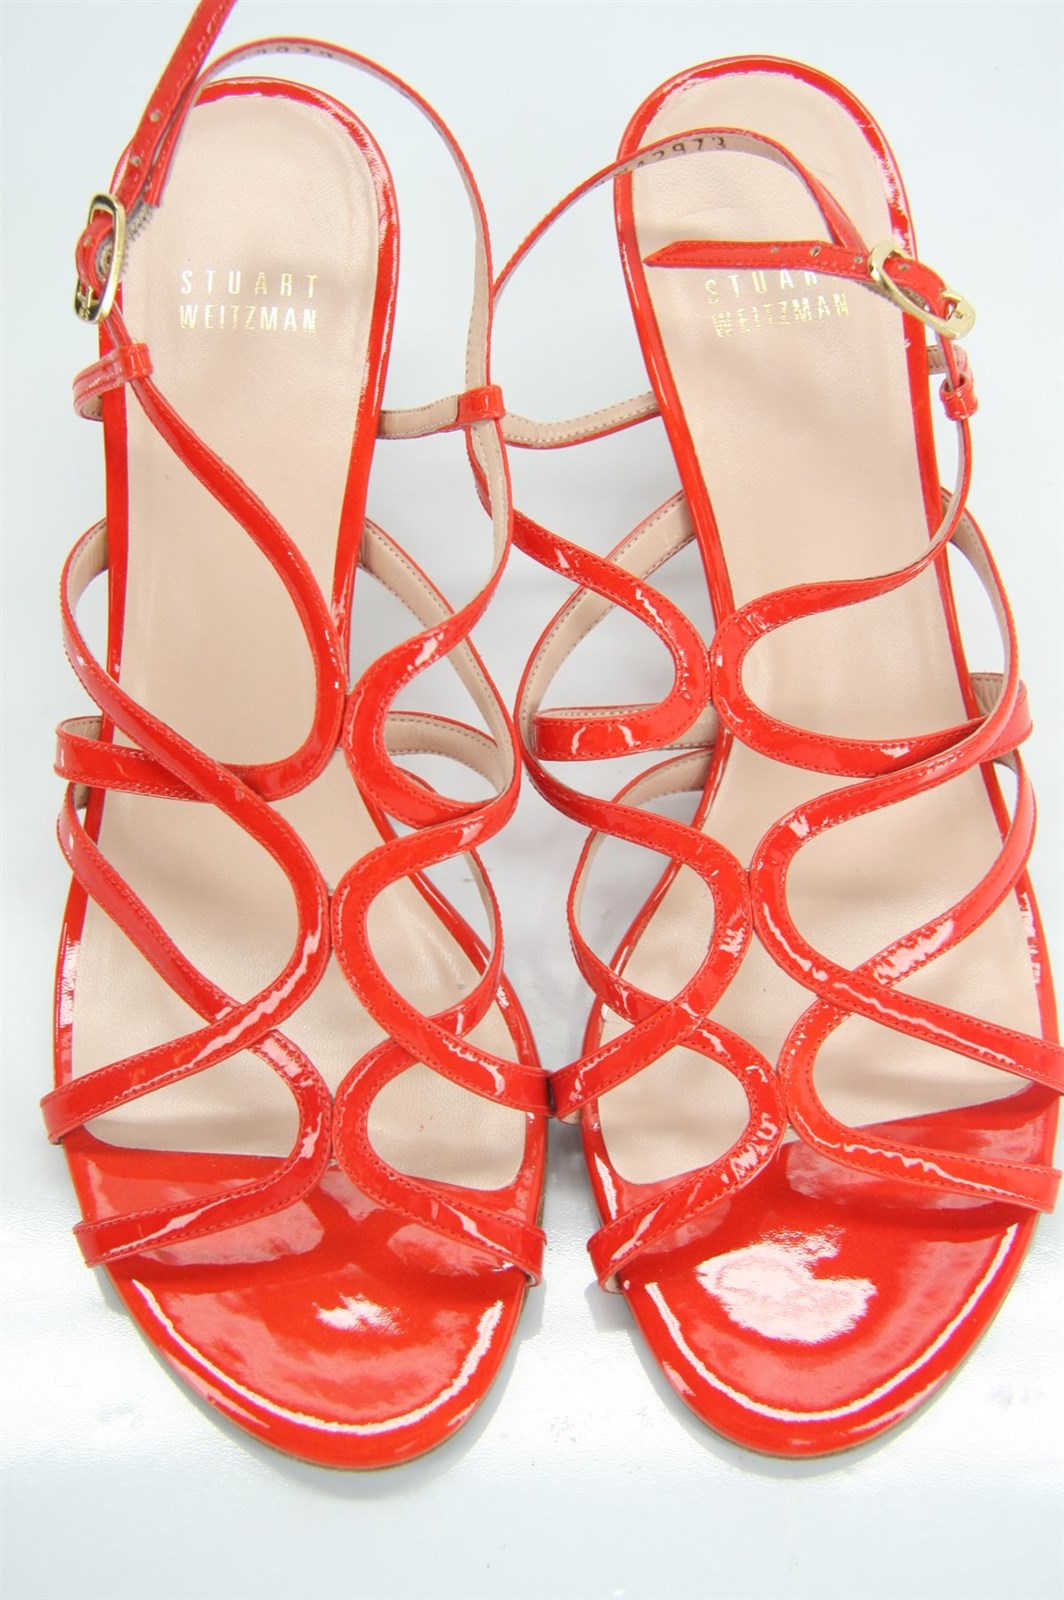 Stuart Weitzman Turning Red Patent Caged Strappy Sandals Size 9 heels New$355 Sz